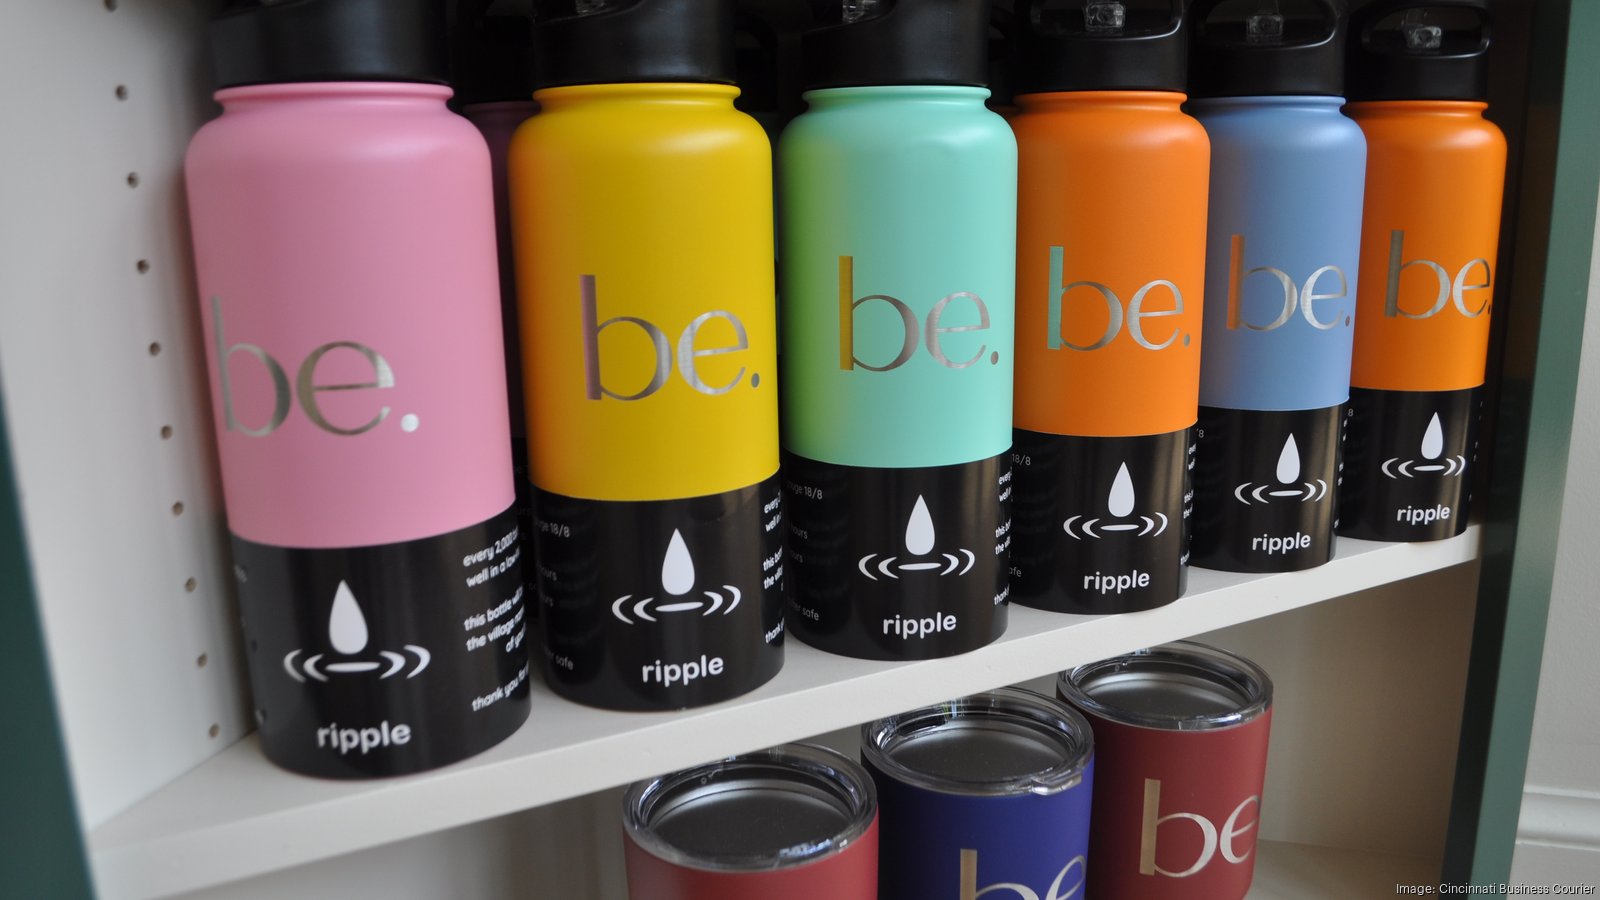 Cincy Inno - Ripple, the Ohio water bottle startup with Xavier University  ties, acquired